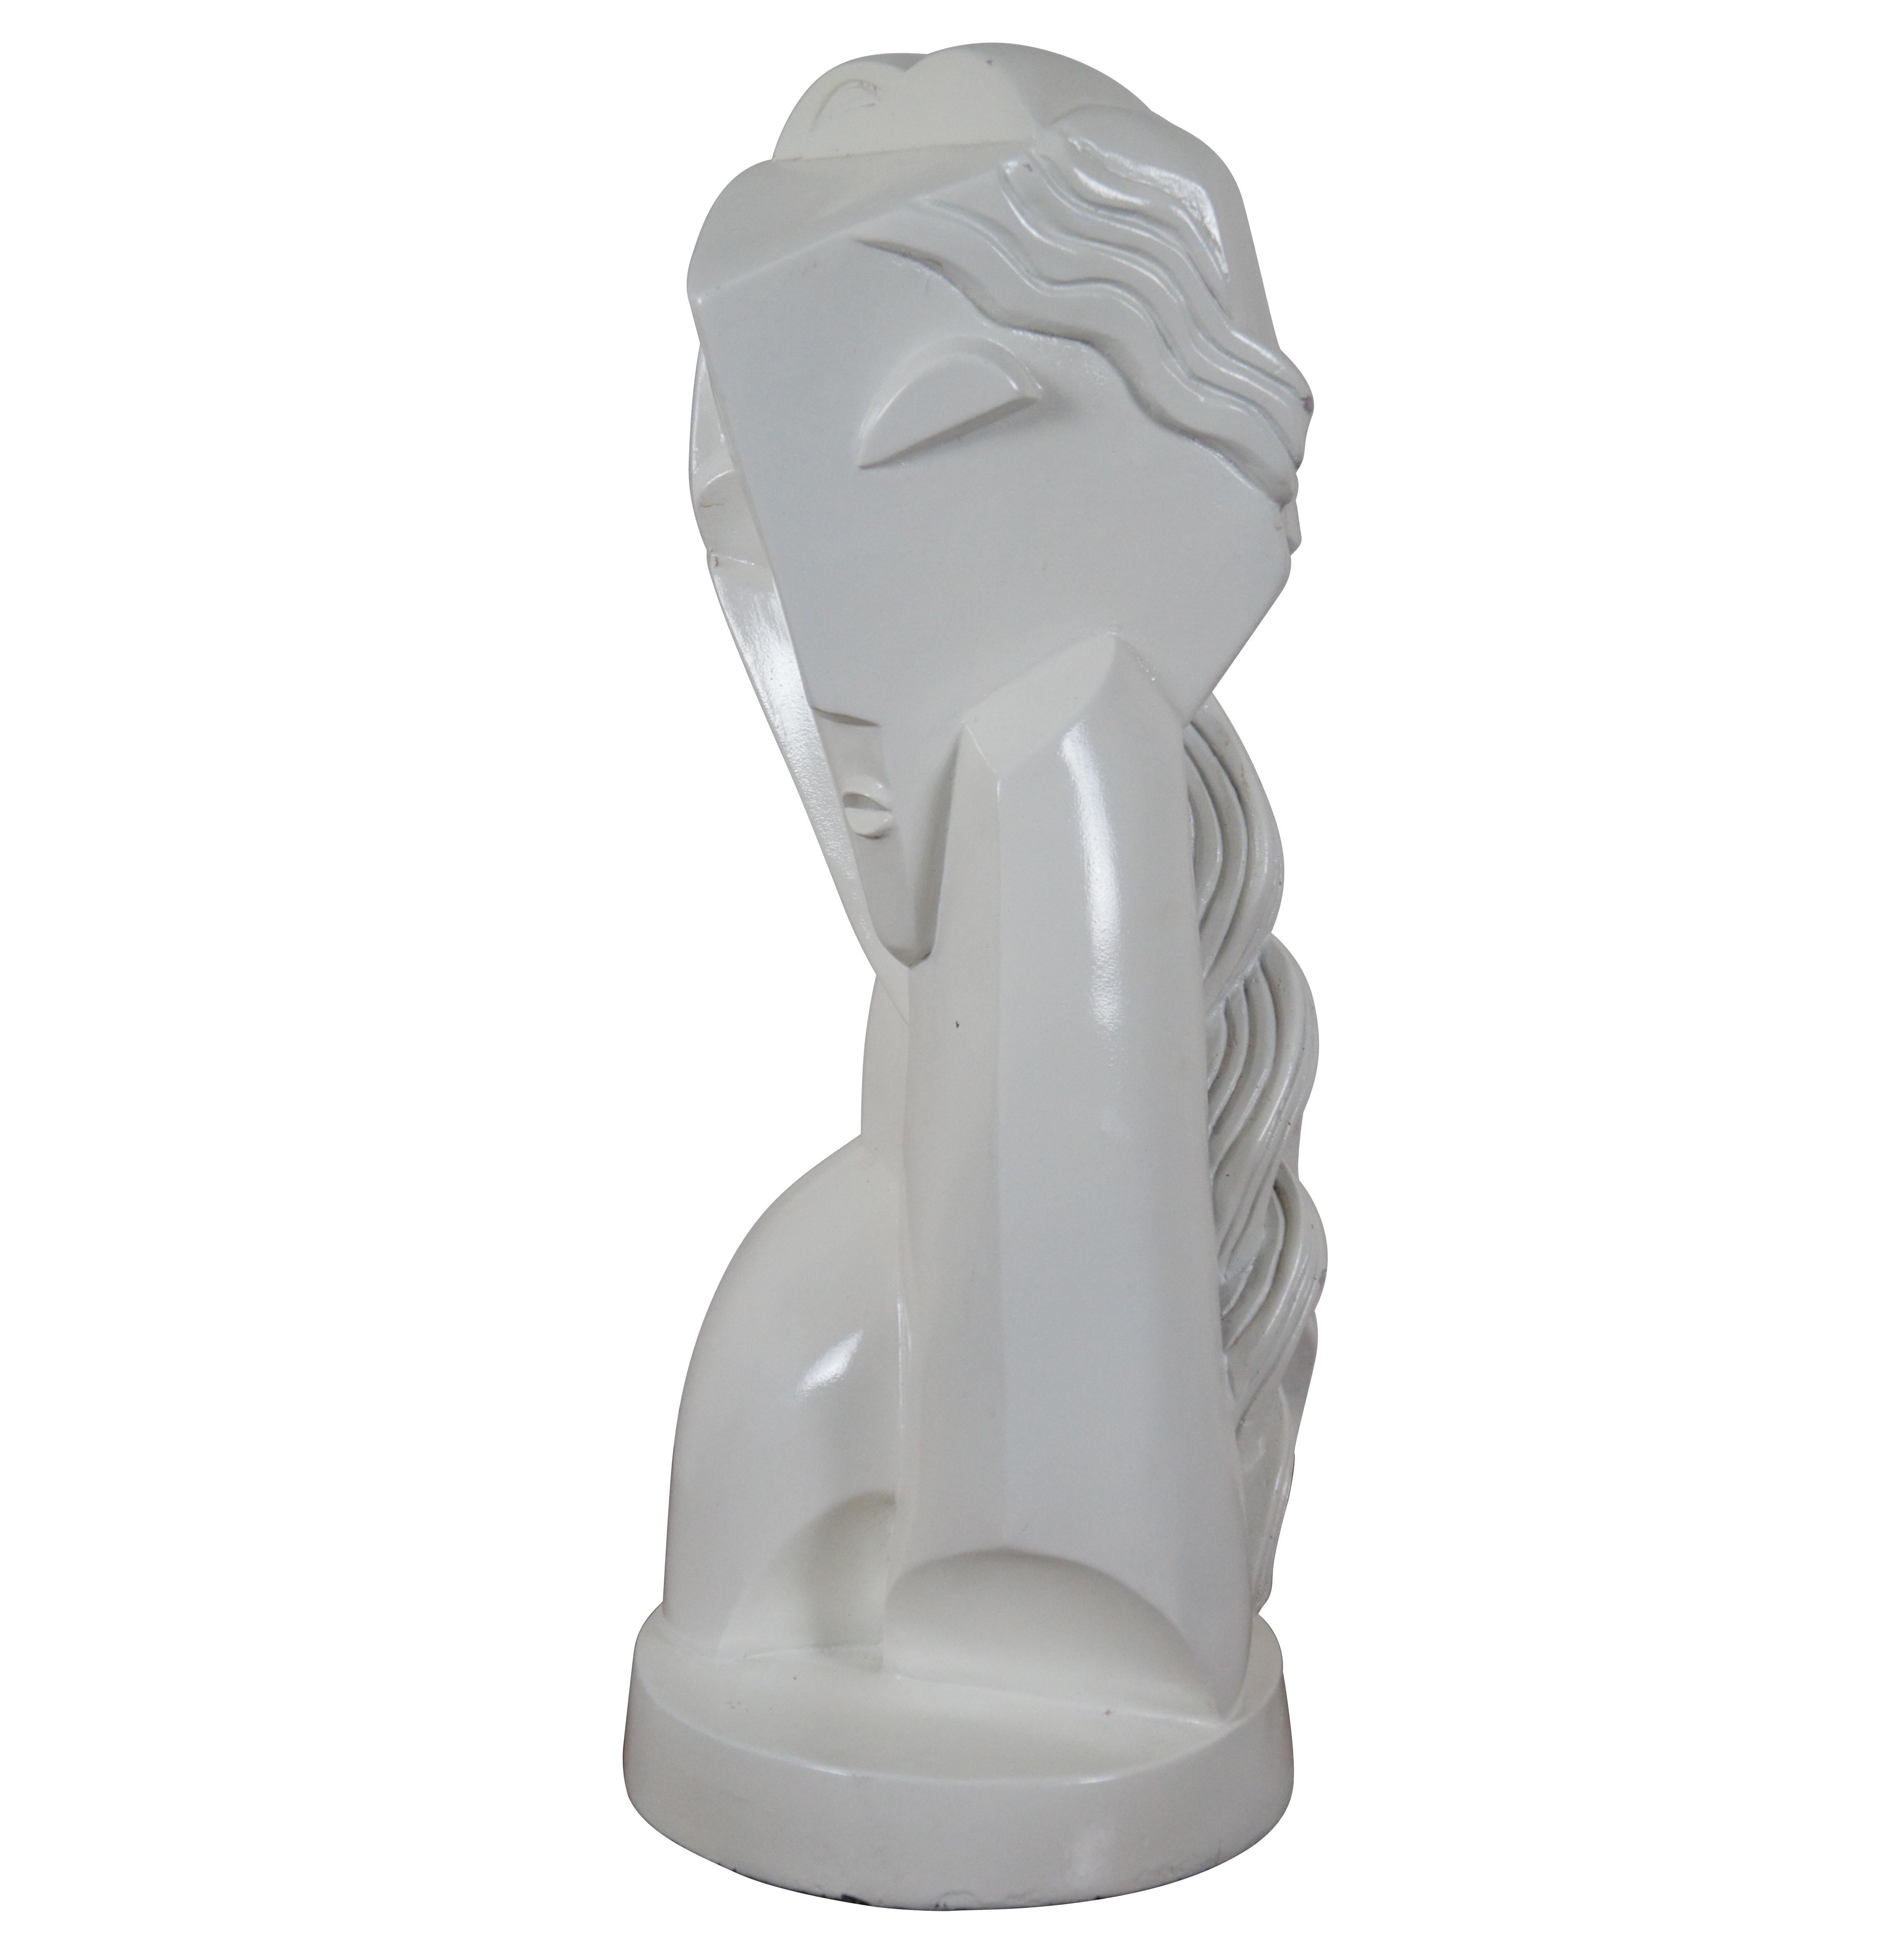 Mid-Century Modern 1961 glossy white plaster impressionist / Expressionist sculpture produced by Austin Products / Productions Inc, based on Head of a Young Girl (Tete de Jeune Fille) – 1920 by Cubist sculptor Henri Laurens.

Henri Laurens, born